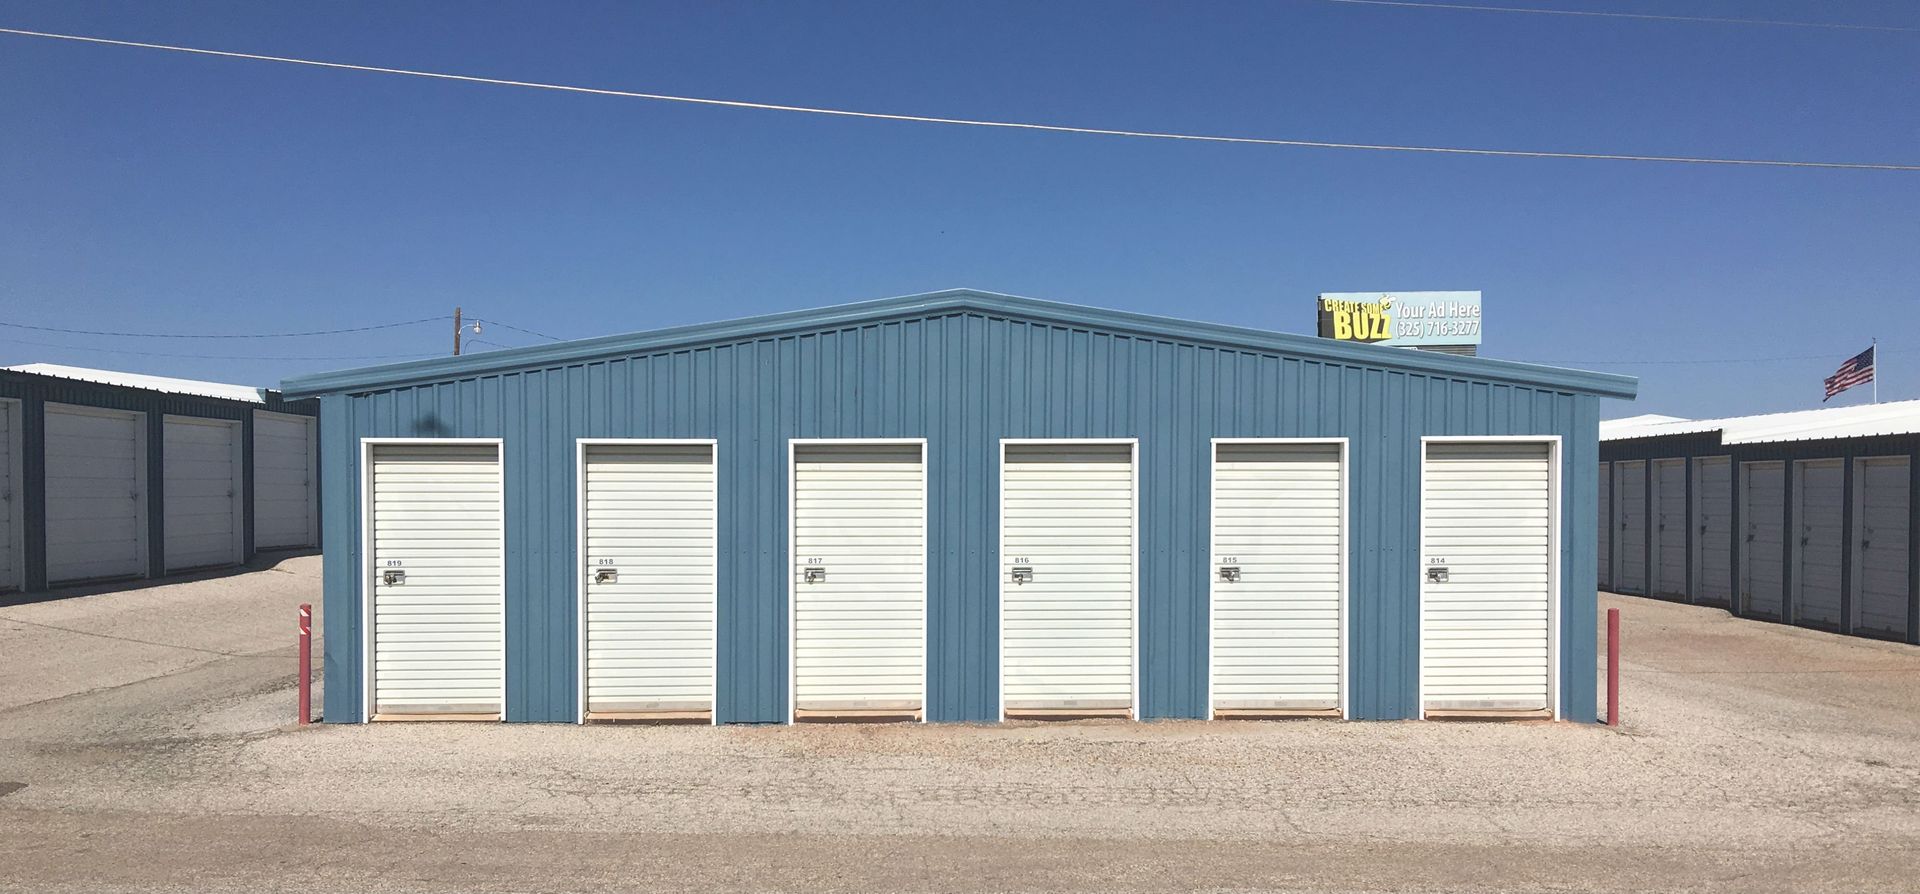 Why Should You Invest in a Storage Unit